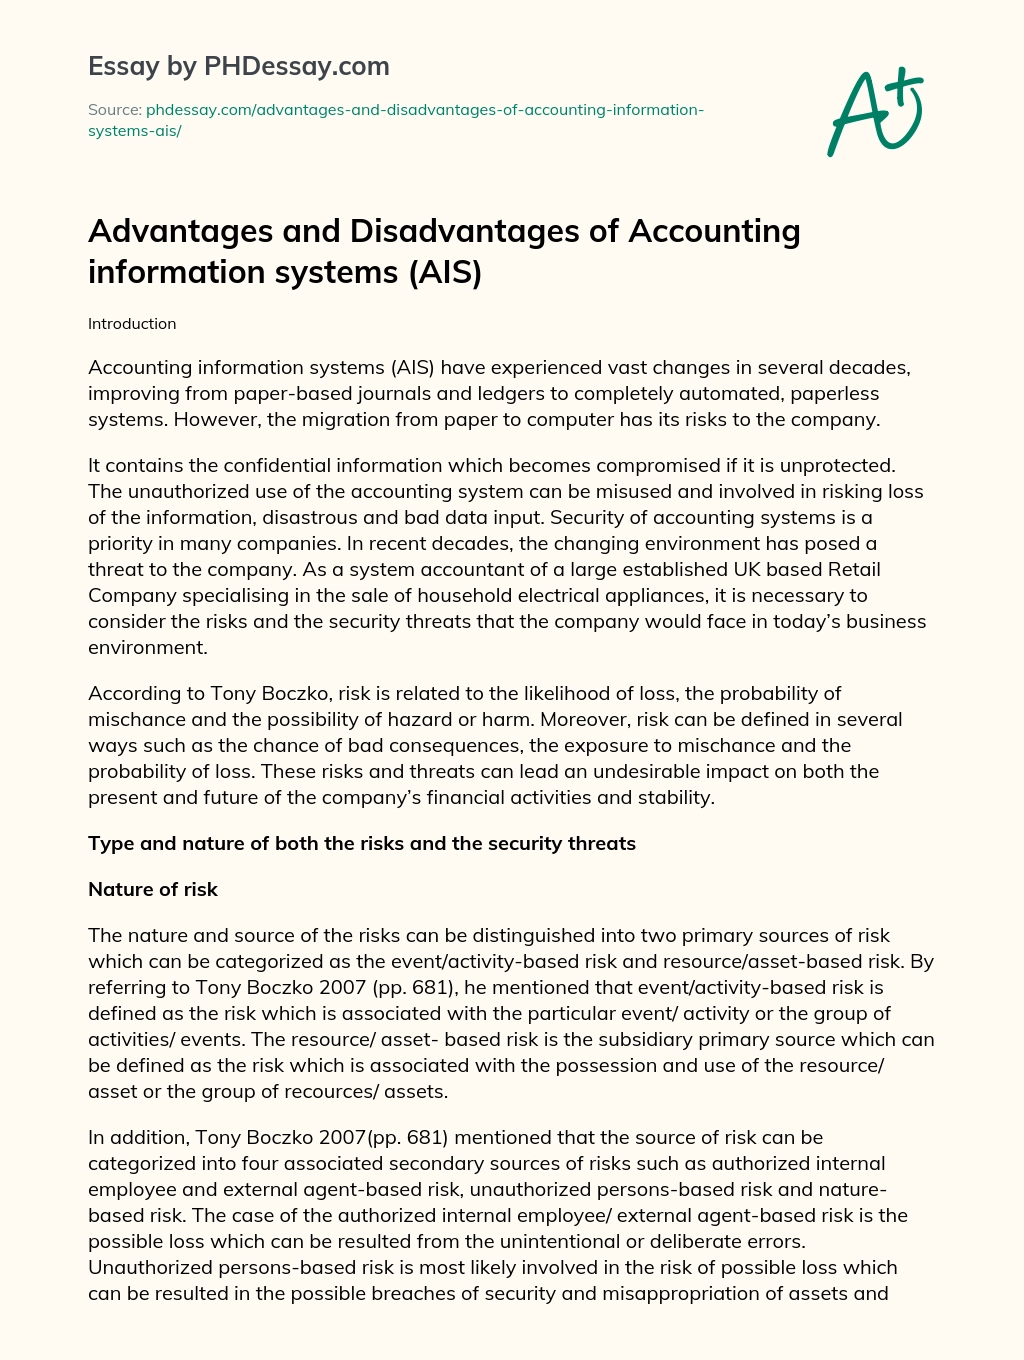 Advantages and Disadvantages of Accounting information systems (AIS) essay